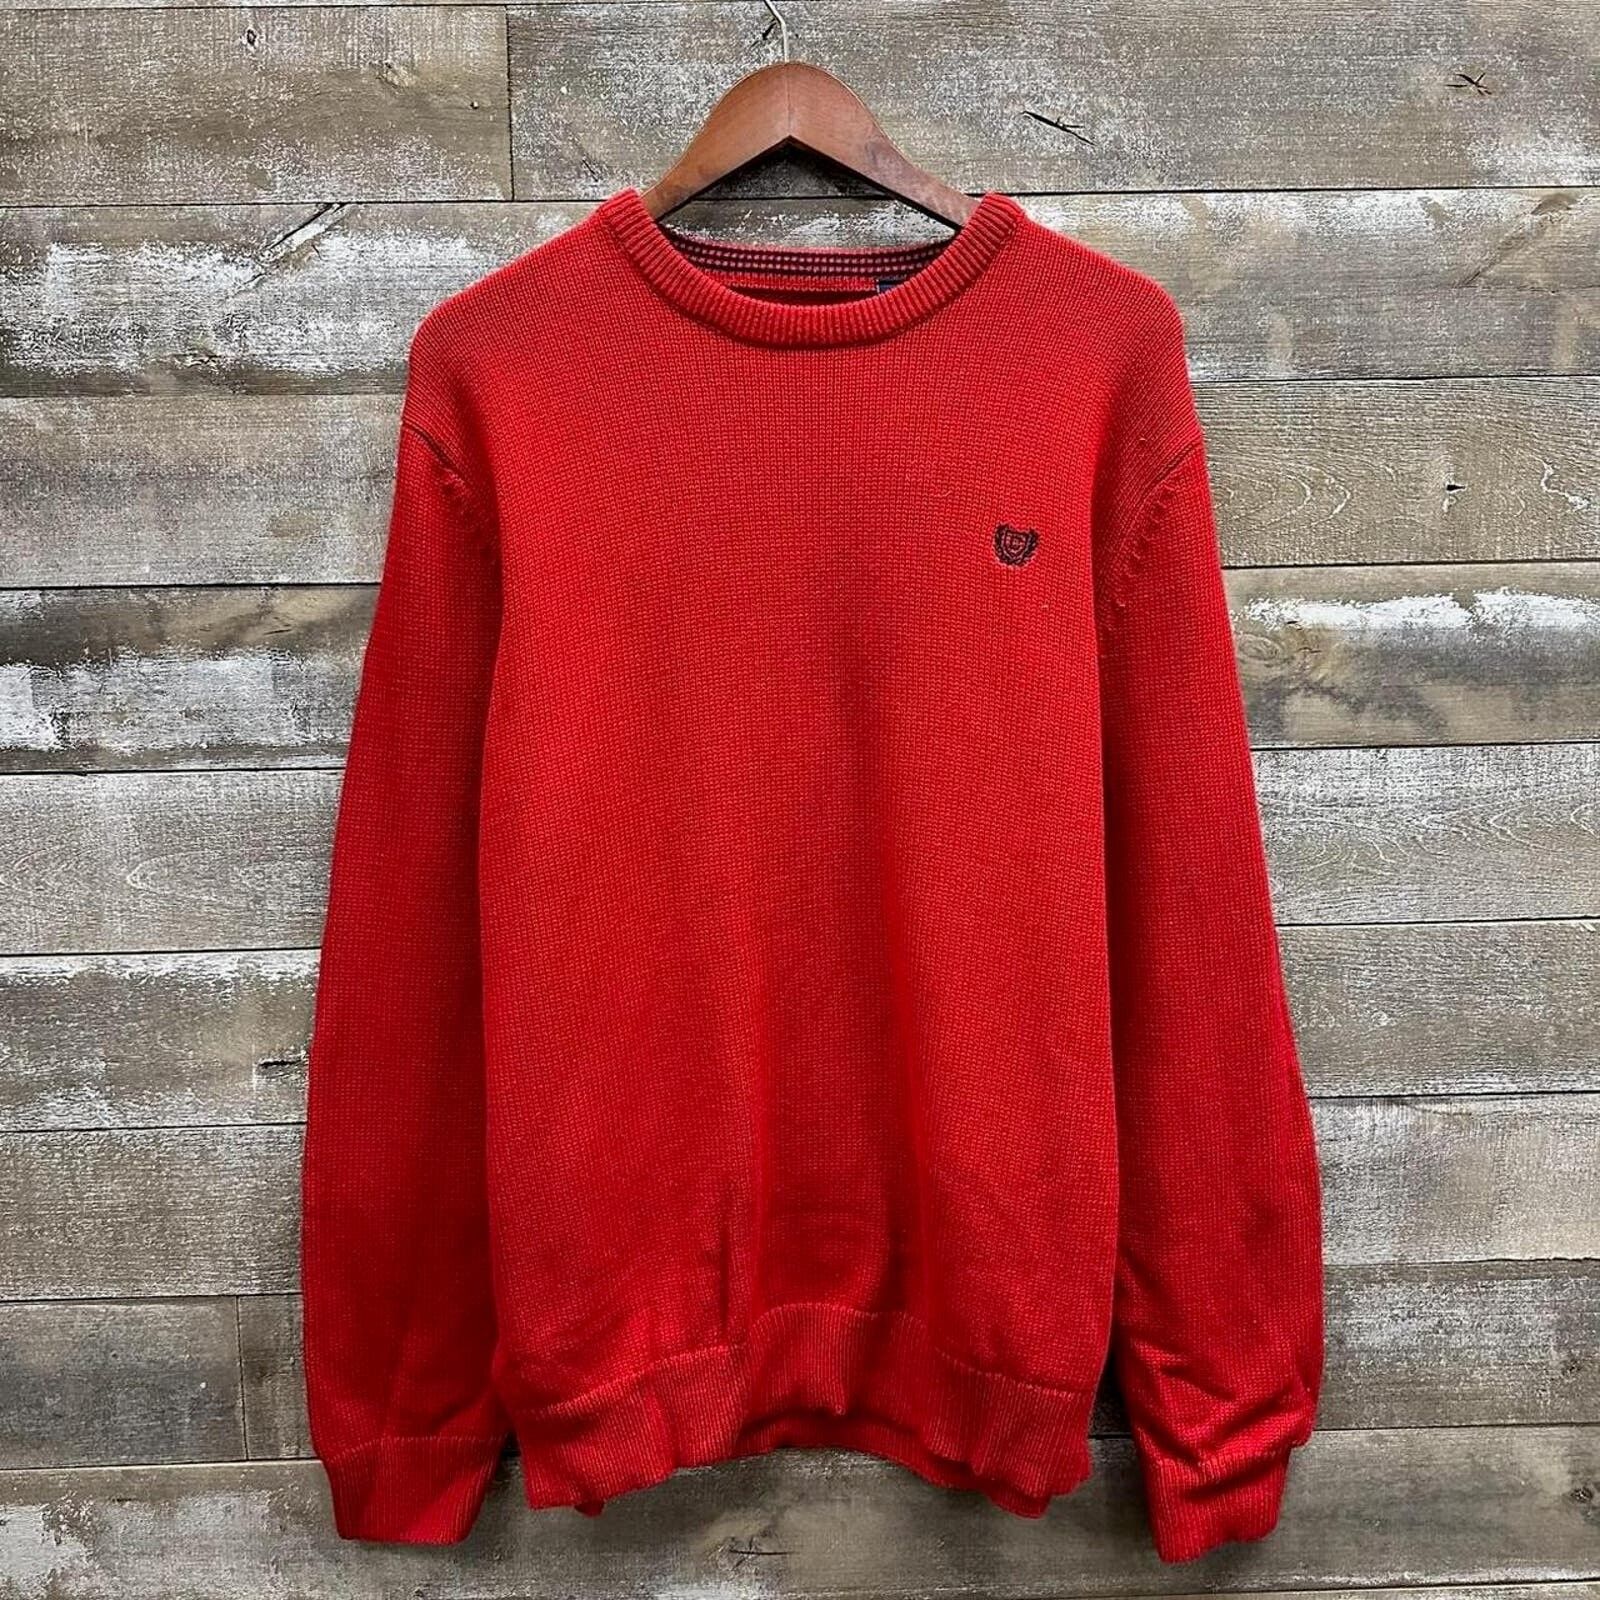 Chaps Vintage 1990’s Chaps Red Knitted Crewneck Sweater Mens Large Size US L / EU 52-54 / 3 - 1 Preview